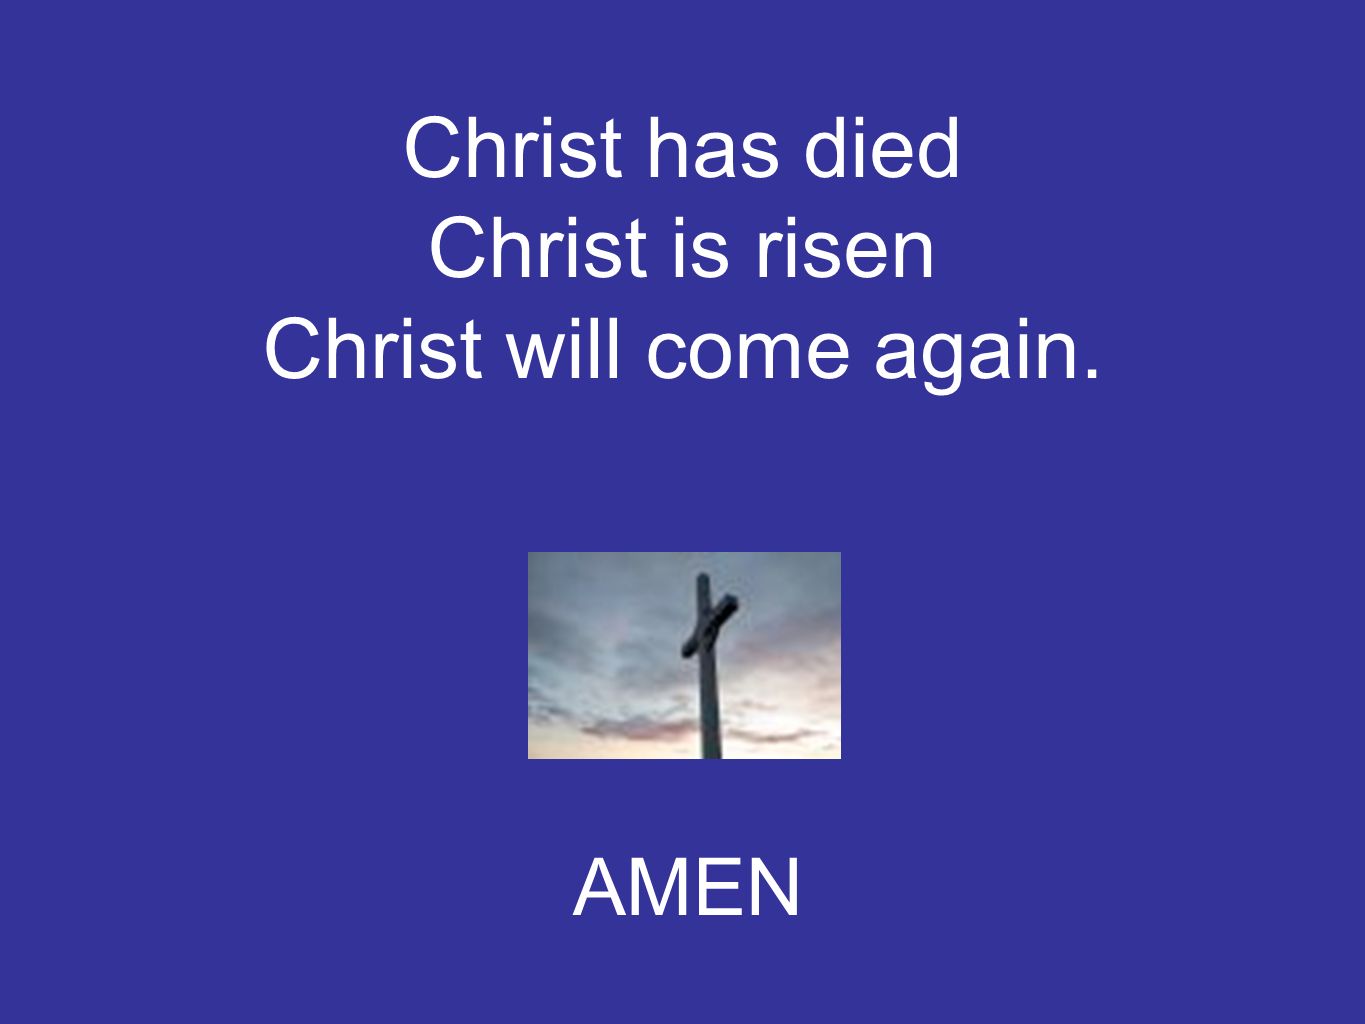 Christ has died Christ is risen Christ will come again. AMEN